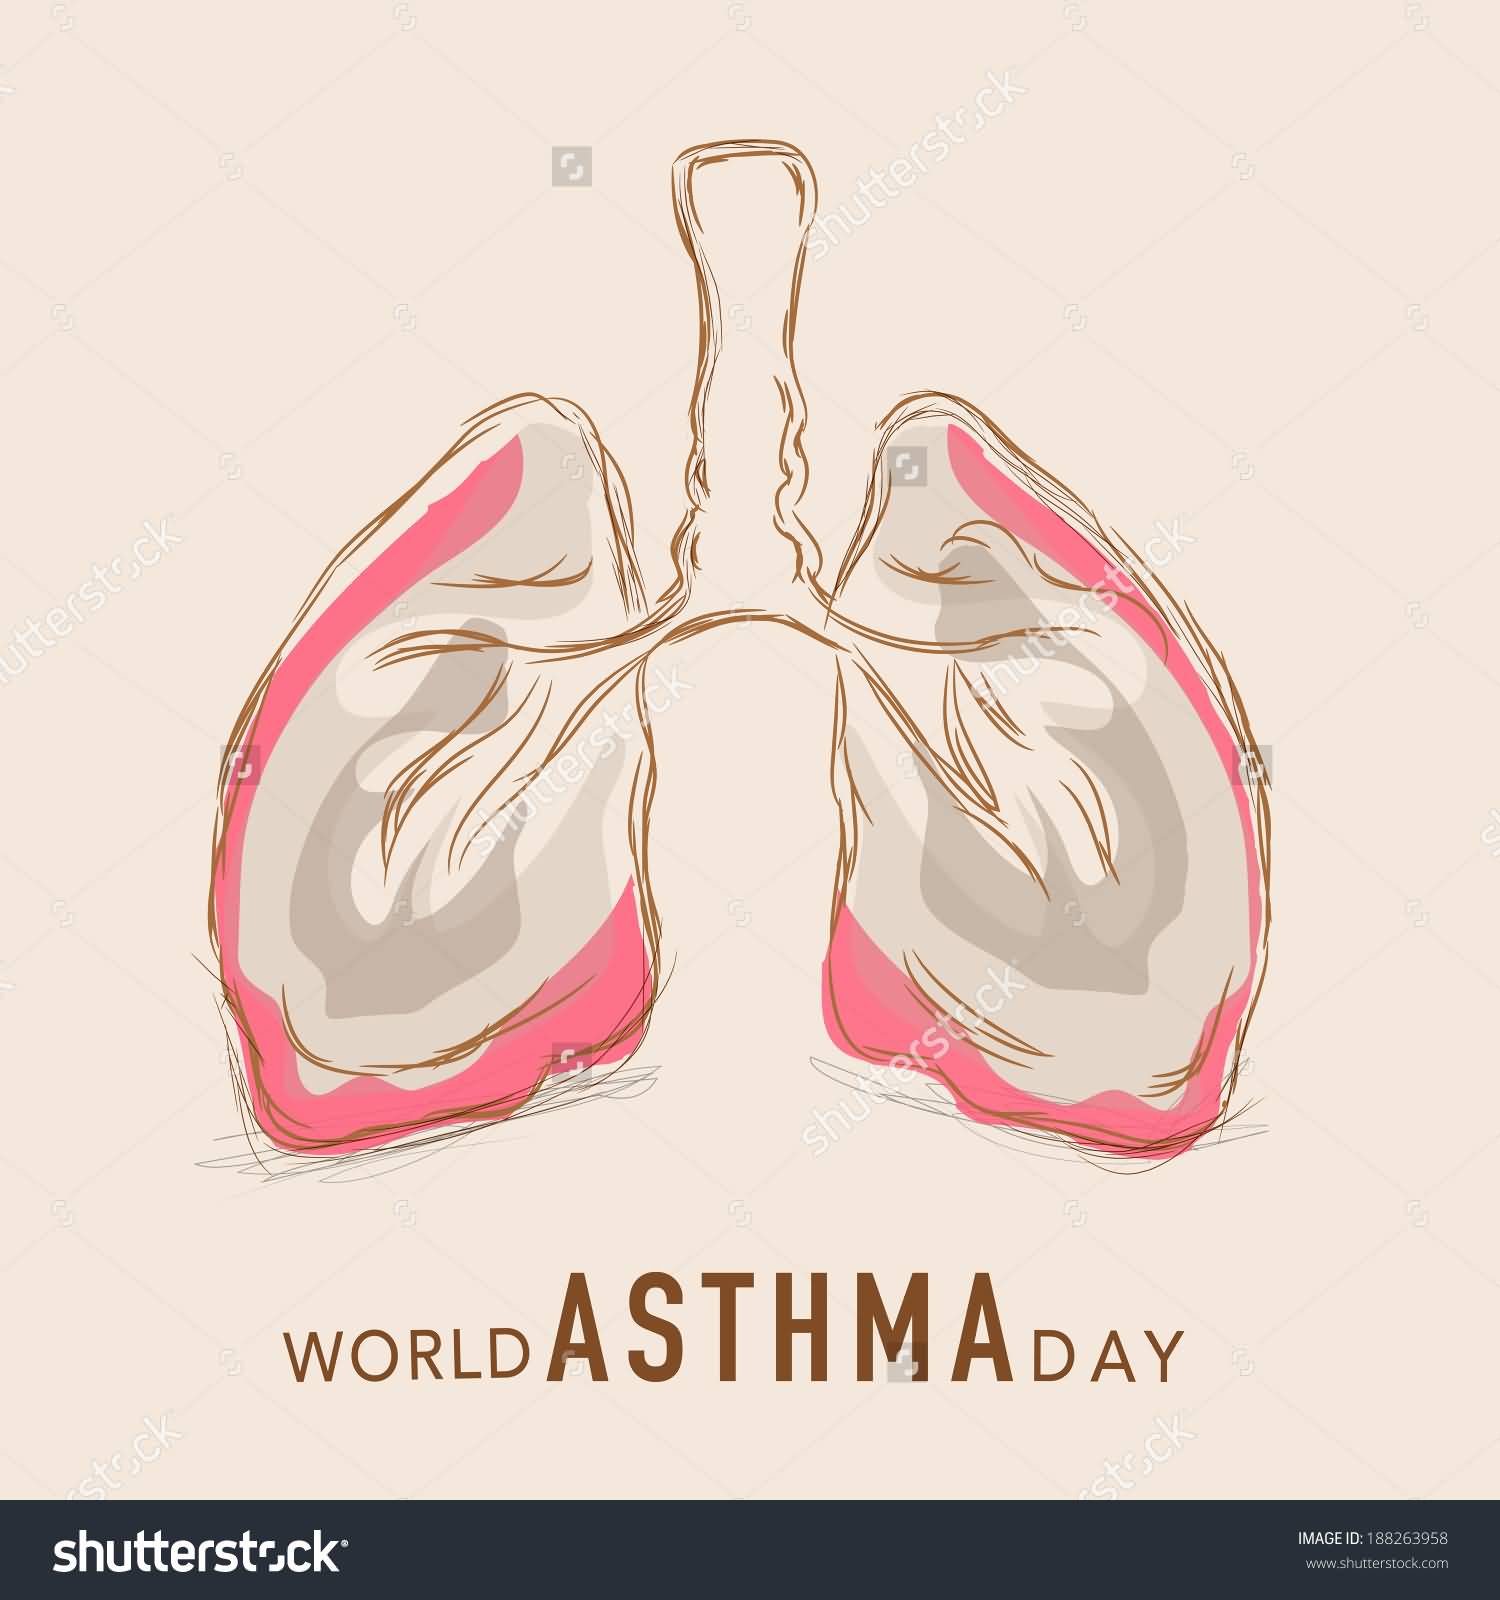 World Asthma Day Lungs Vector Illustration